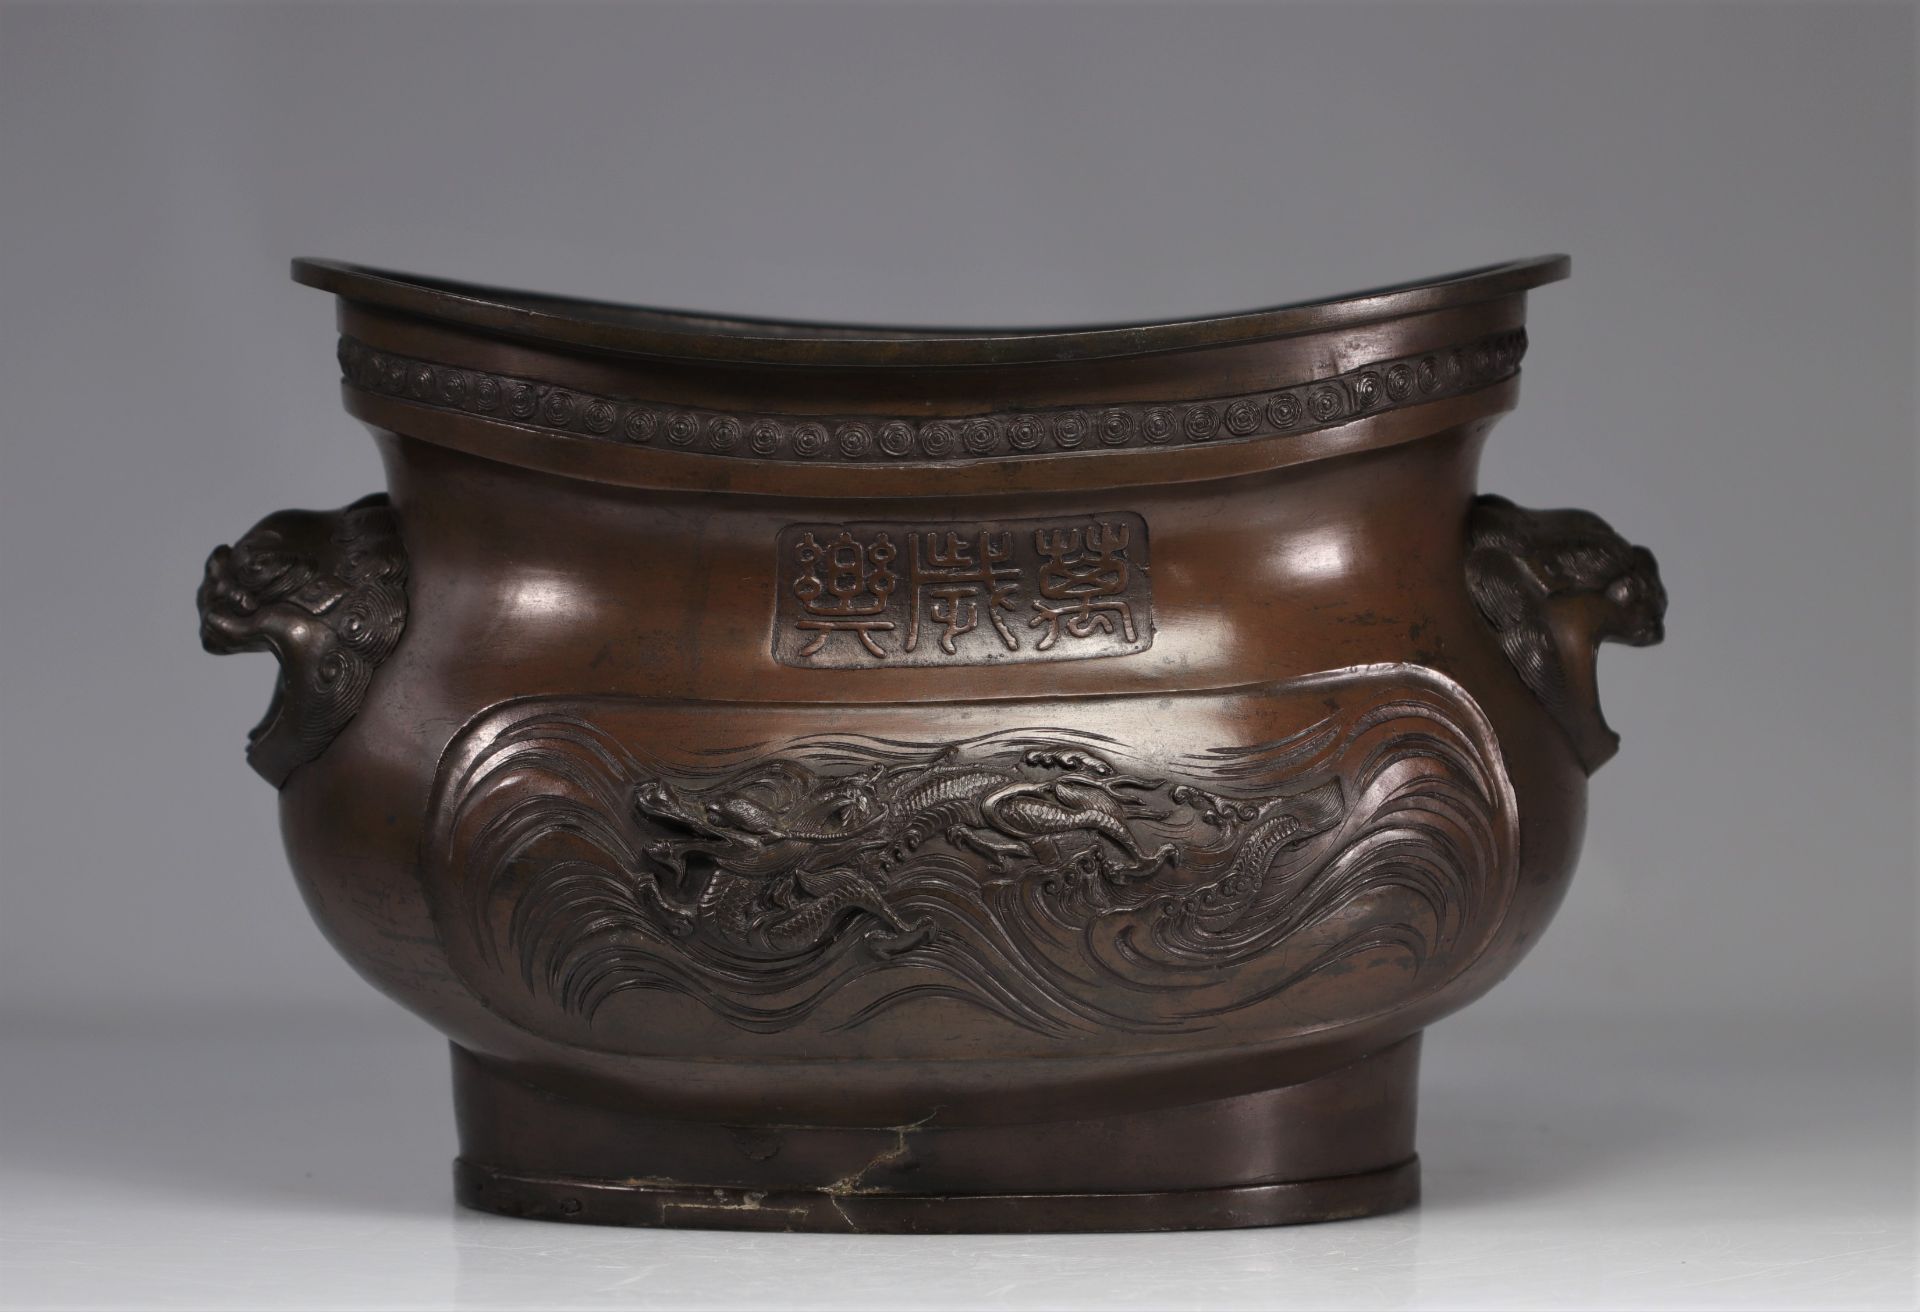 Japanese bronze planter decorated with dragons from 19th century